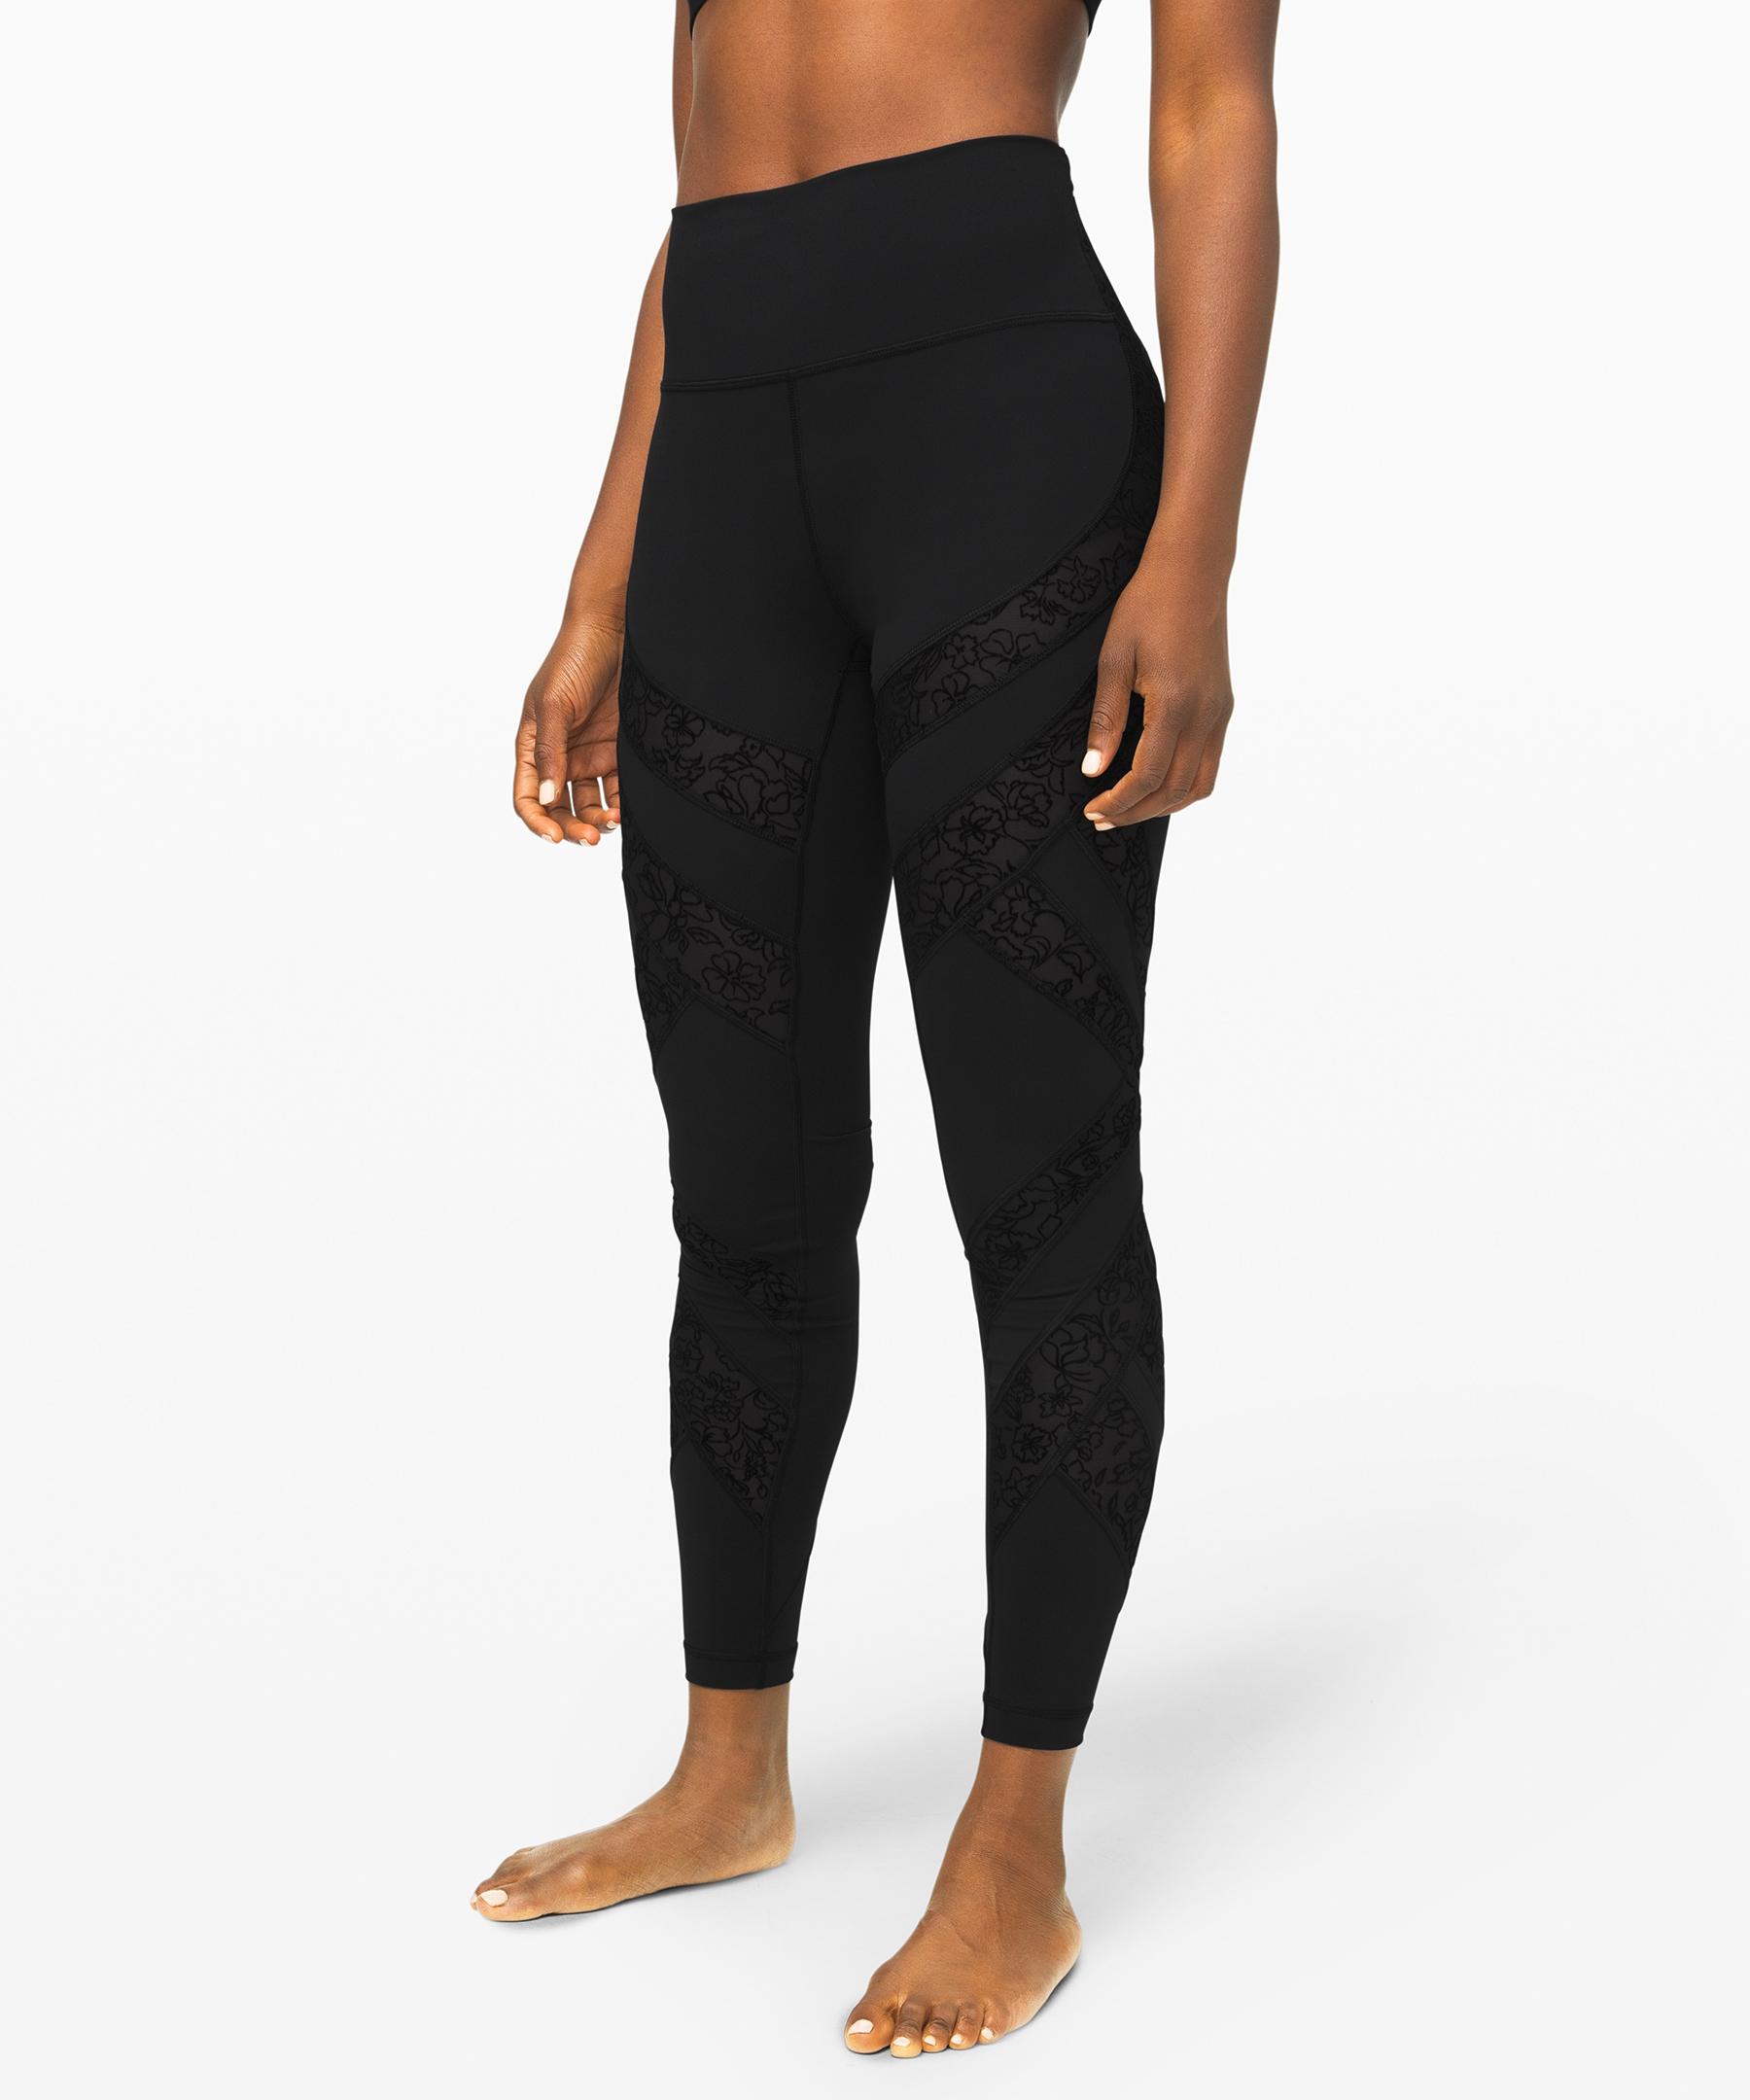 Lululemon Tights Warranty Deed  International Society of Precision  Agriculture